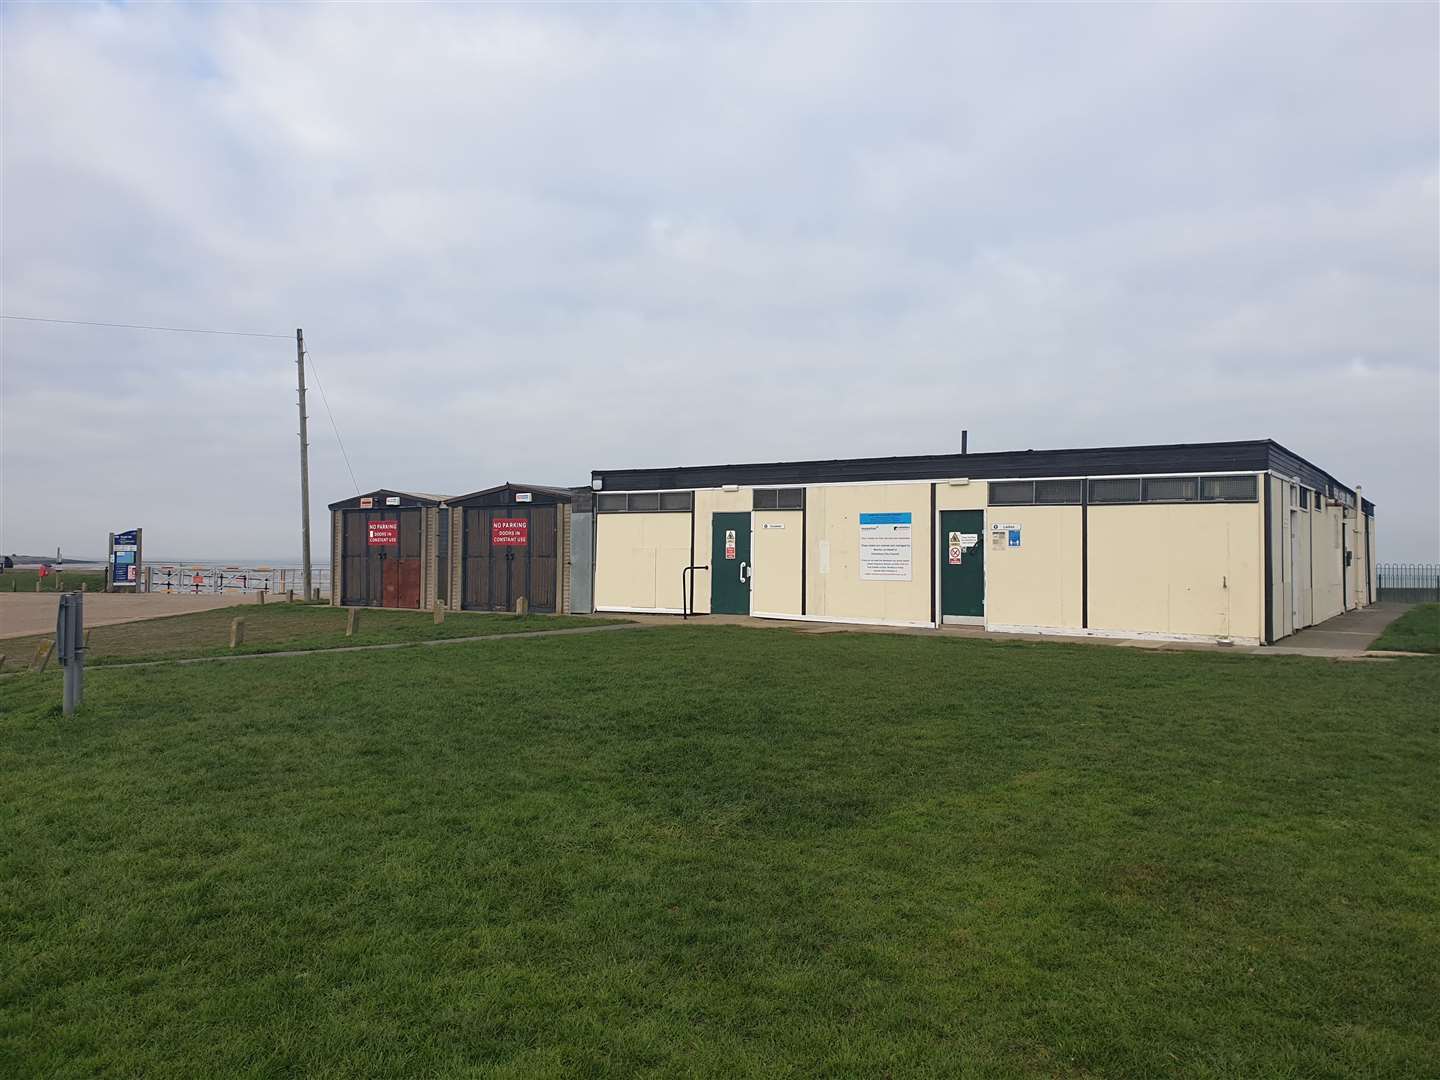 The Hampton Pleasure Ground toilets on the Herne Bay seafront were recently targeted